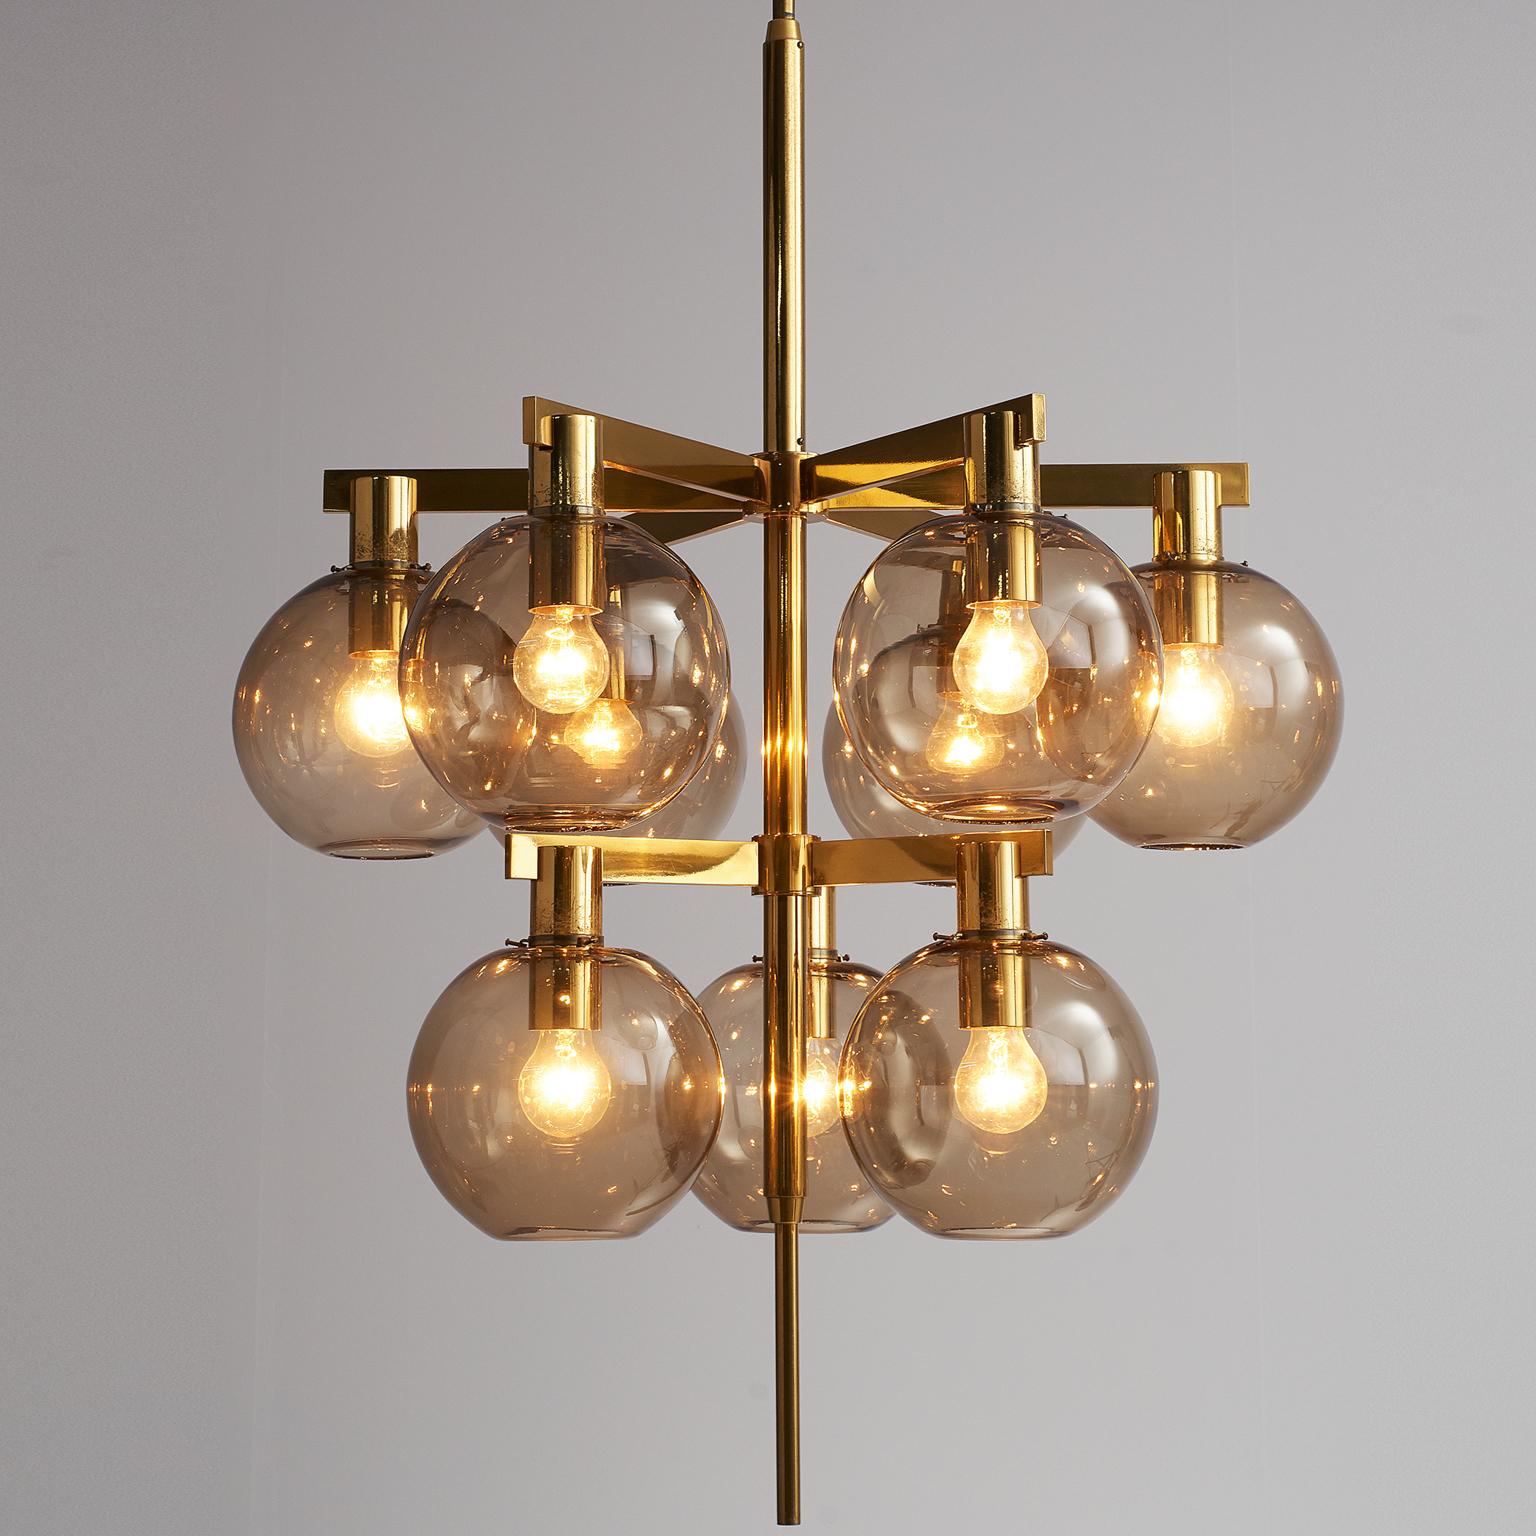 Hans-Agne Jakobsson, ceiling lamp model T-348/6 'Pastoral', brass and glass, Sweden. 

This chandelier is designed by Hans-Agne Jakobsson. The chandelier is produced by Hans-Agne Jakobsson AB in Markaryd, Sweden. The brass frame has nine brass tubes